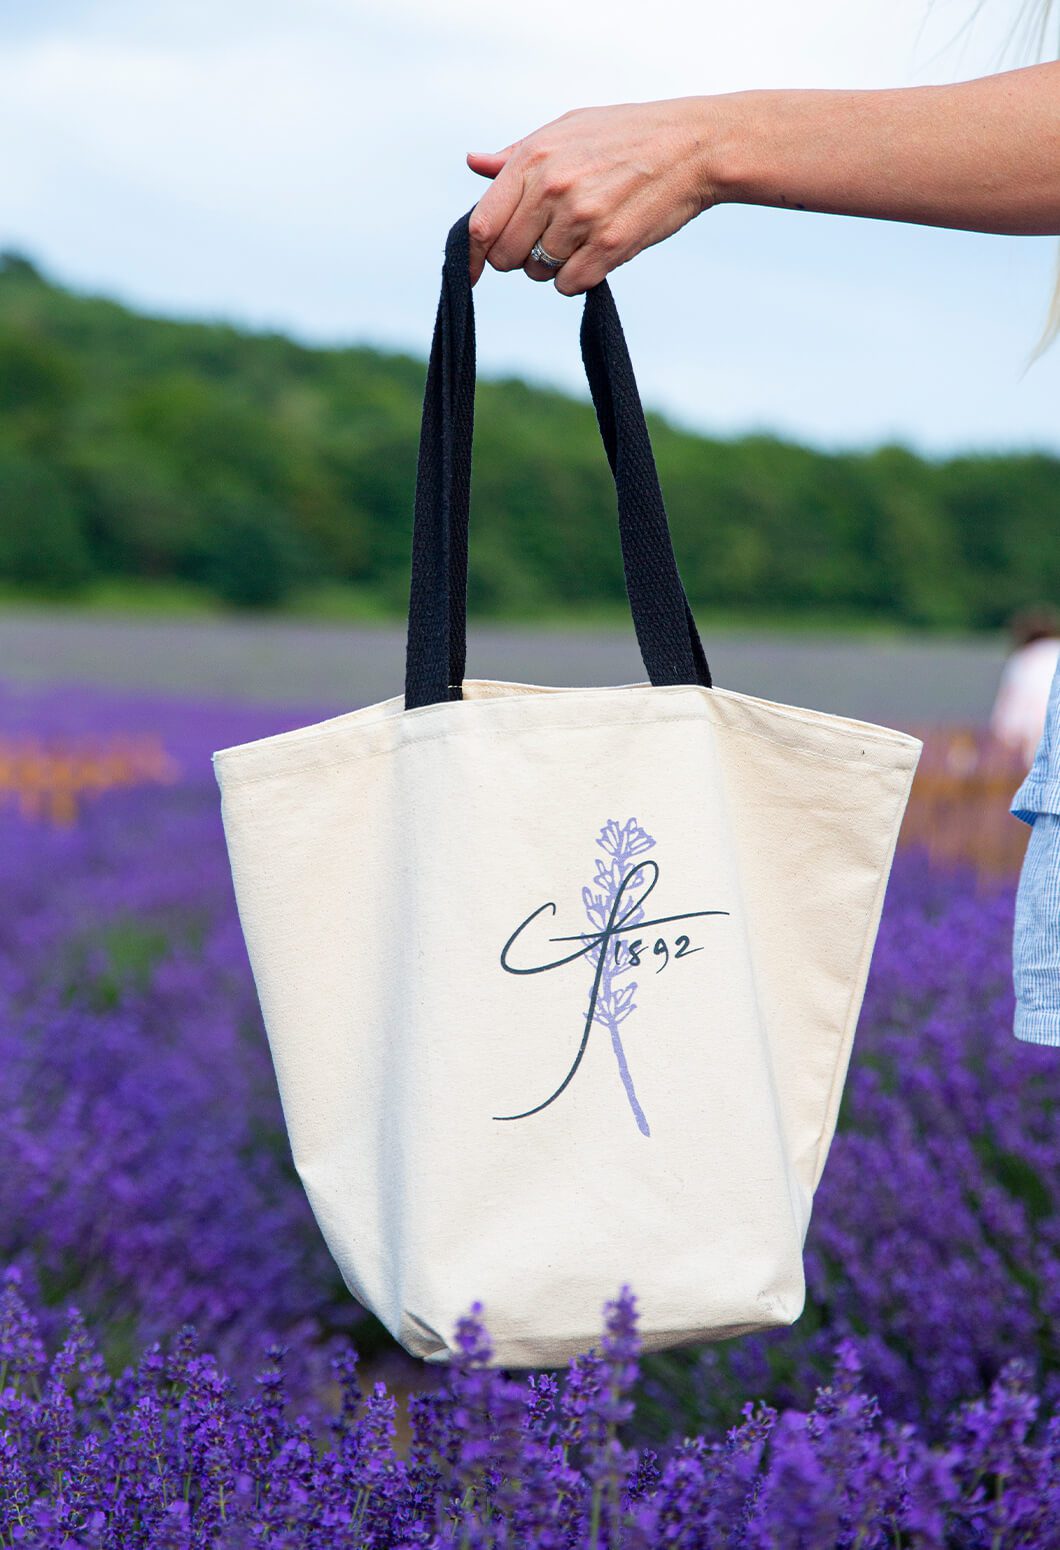 tote bag design with illustrated logo